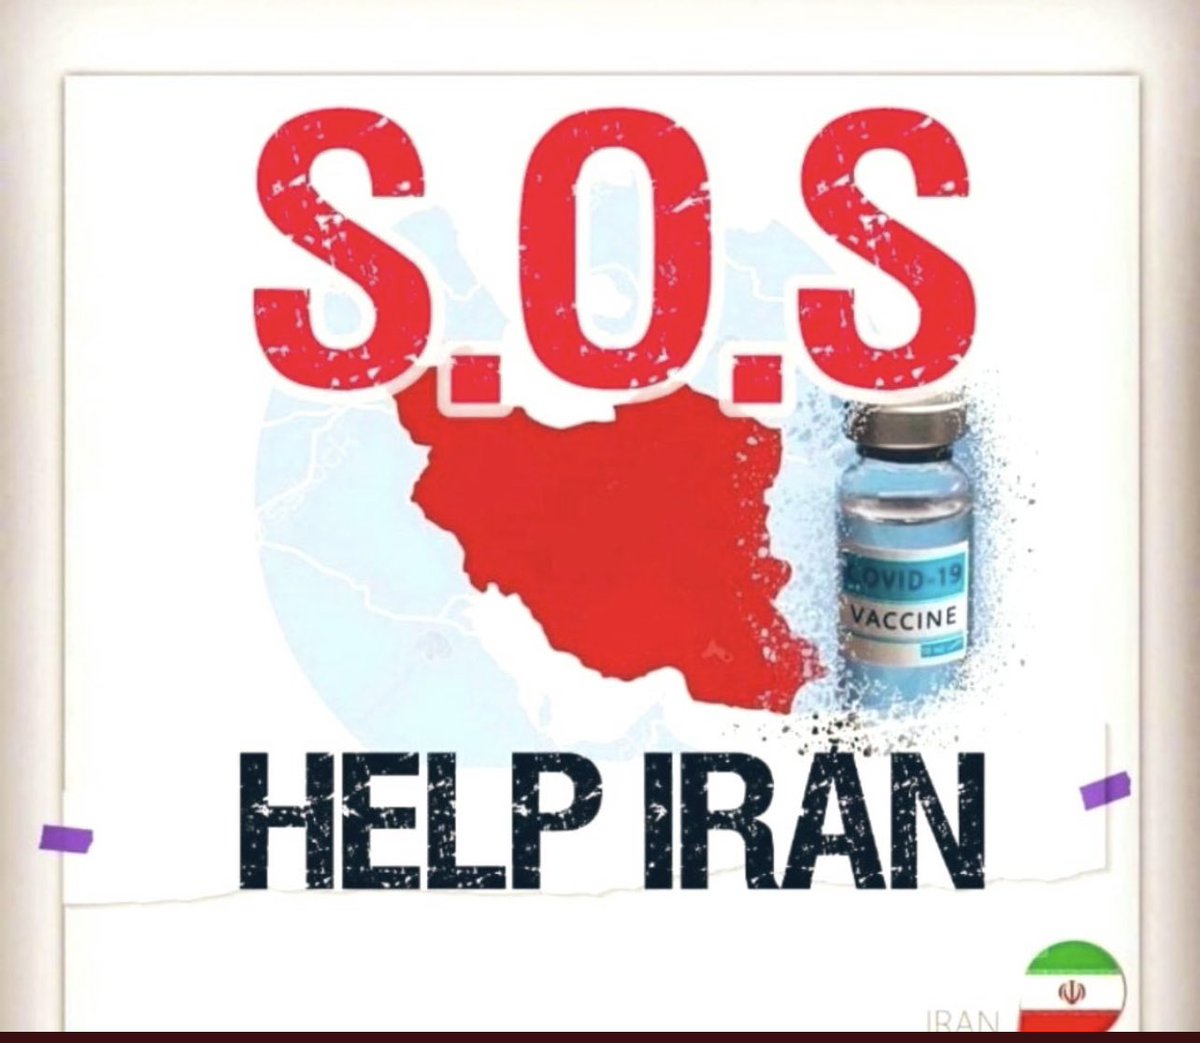 Catasrophe has hit Iran. Everyday that passes by, innocent live are lost( every two minutes one death). SOS , WHO I plead you nit to delay allocating appropriate resources( oxygen, medication and VACCINE) to help Iranian. 😭😢#soslran #HelpIran #who @WHO